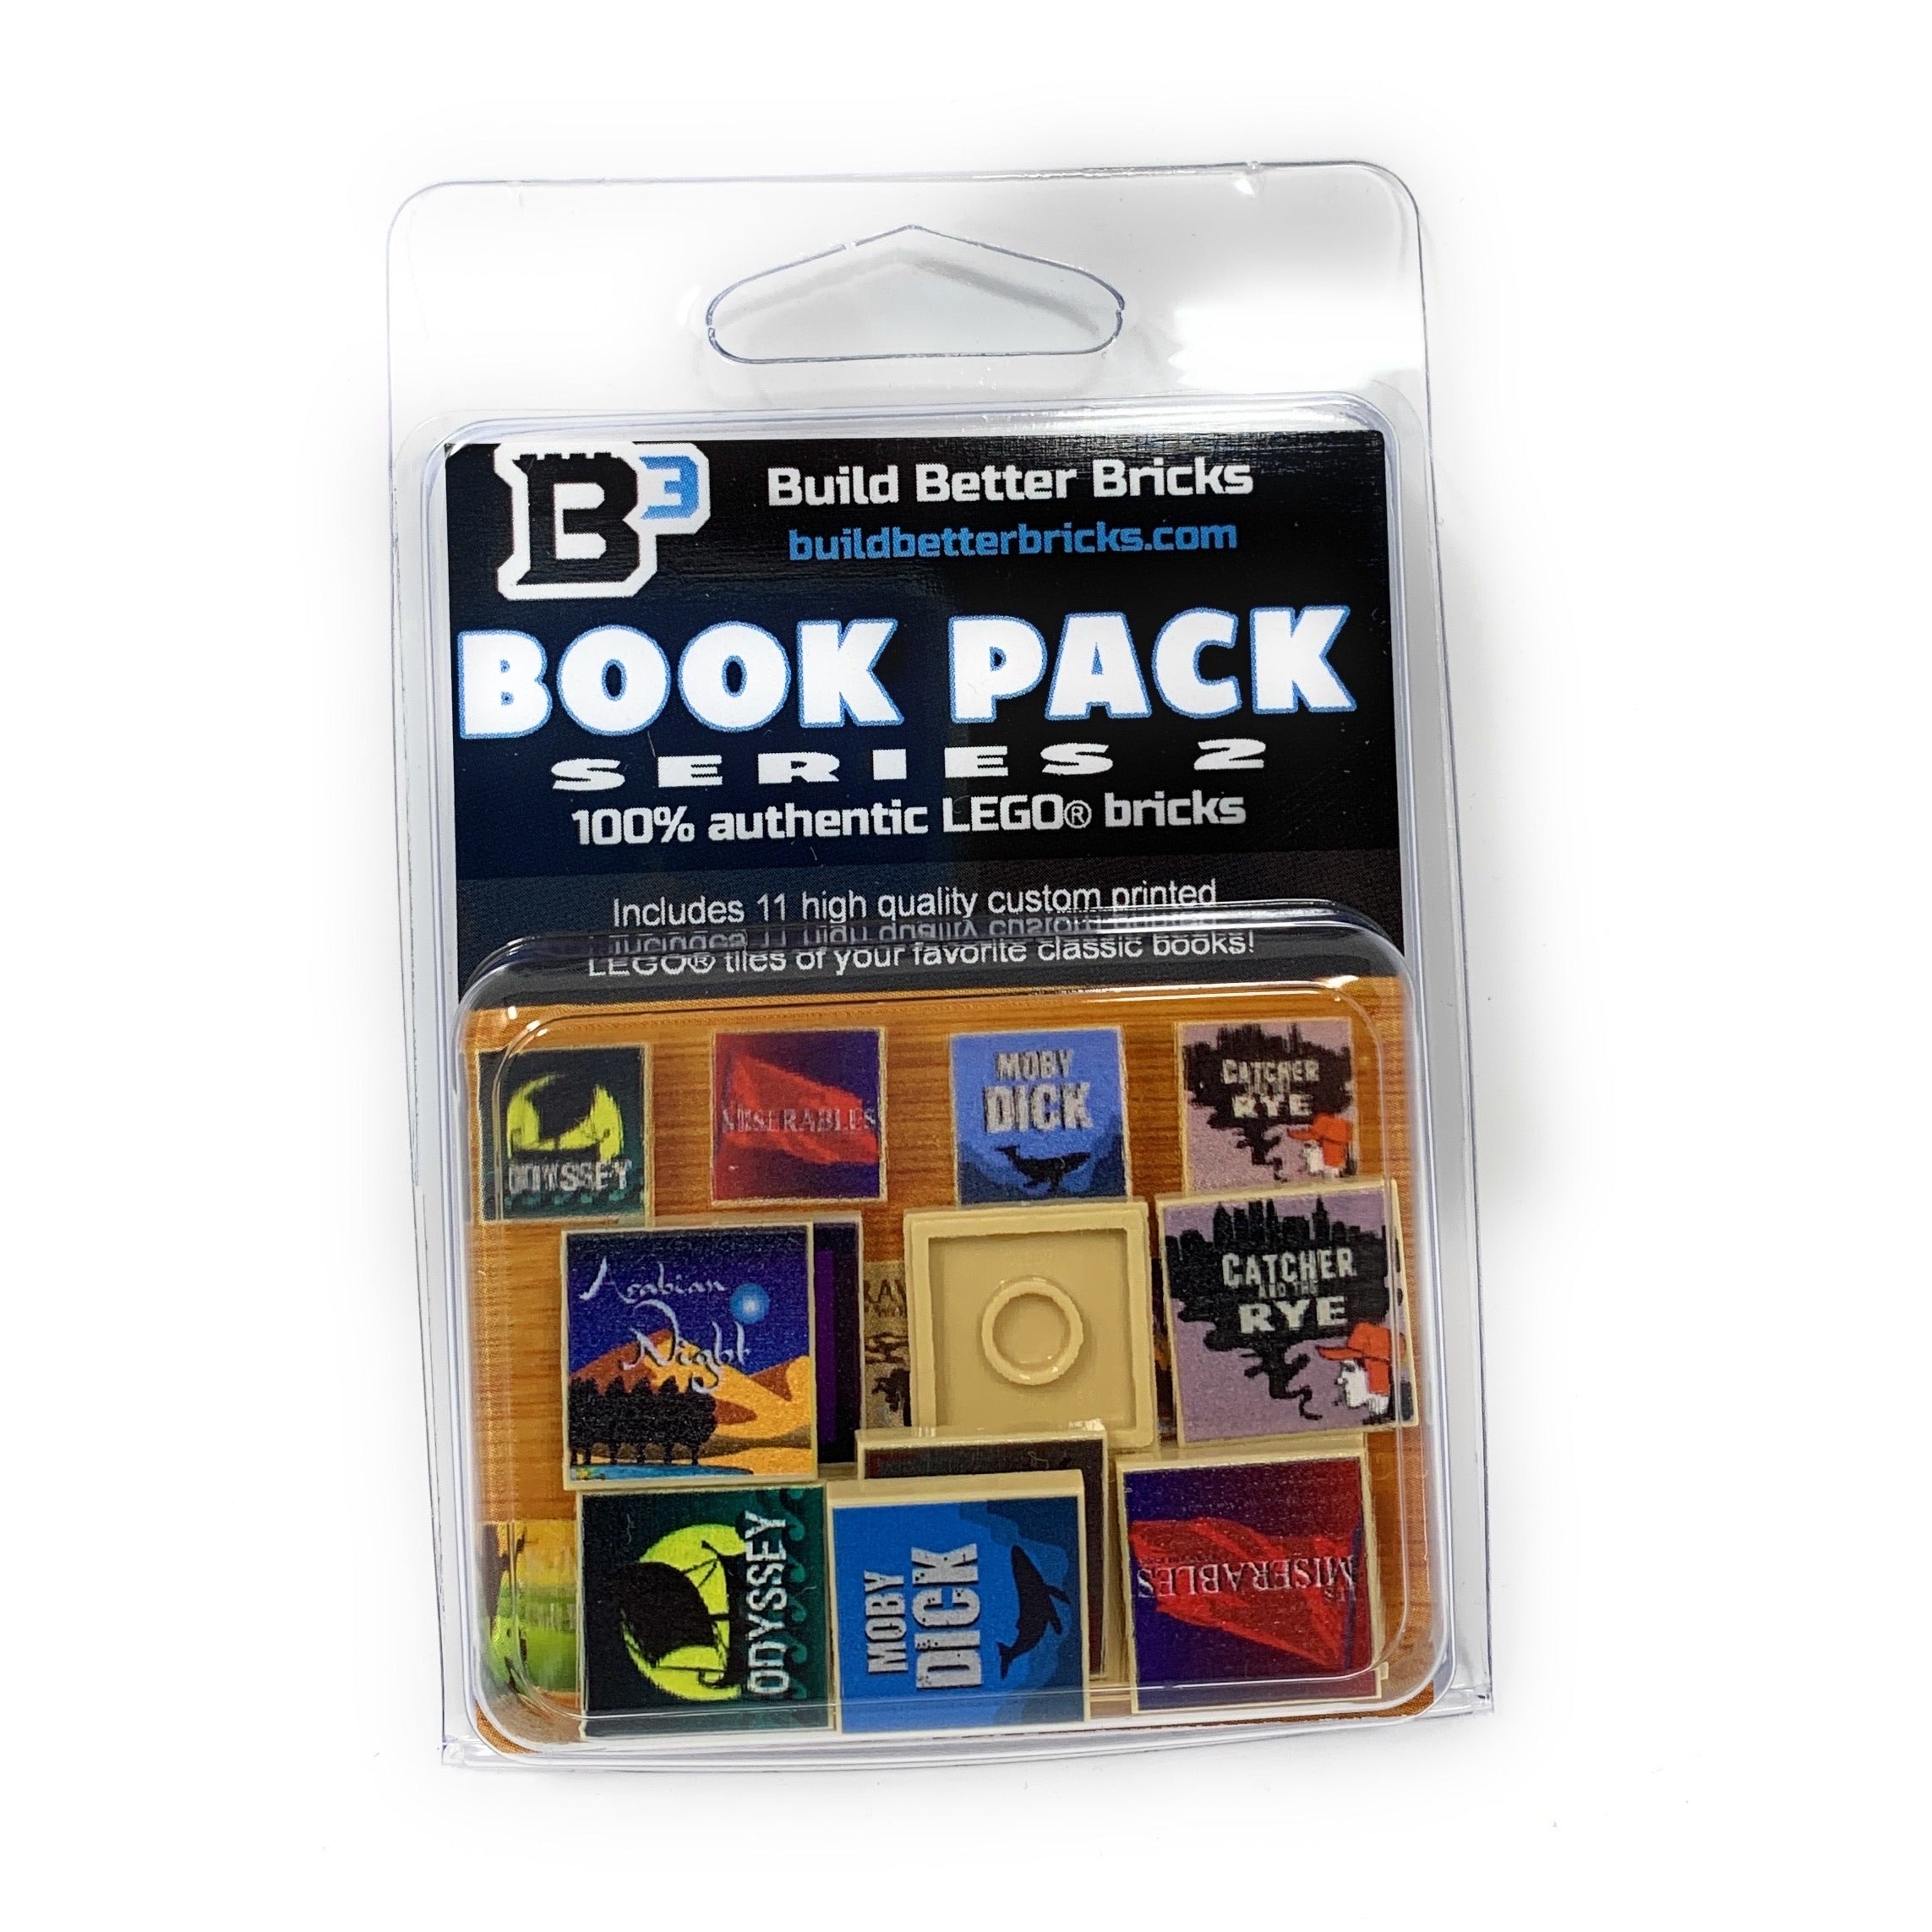 B3 Customs Classic Books Pack (Series 2) made using LEGO parts